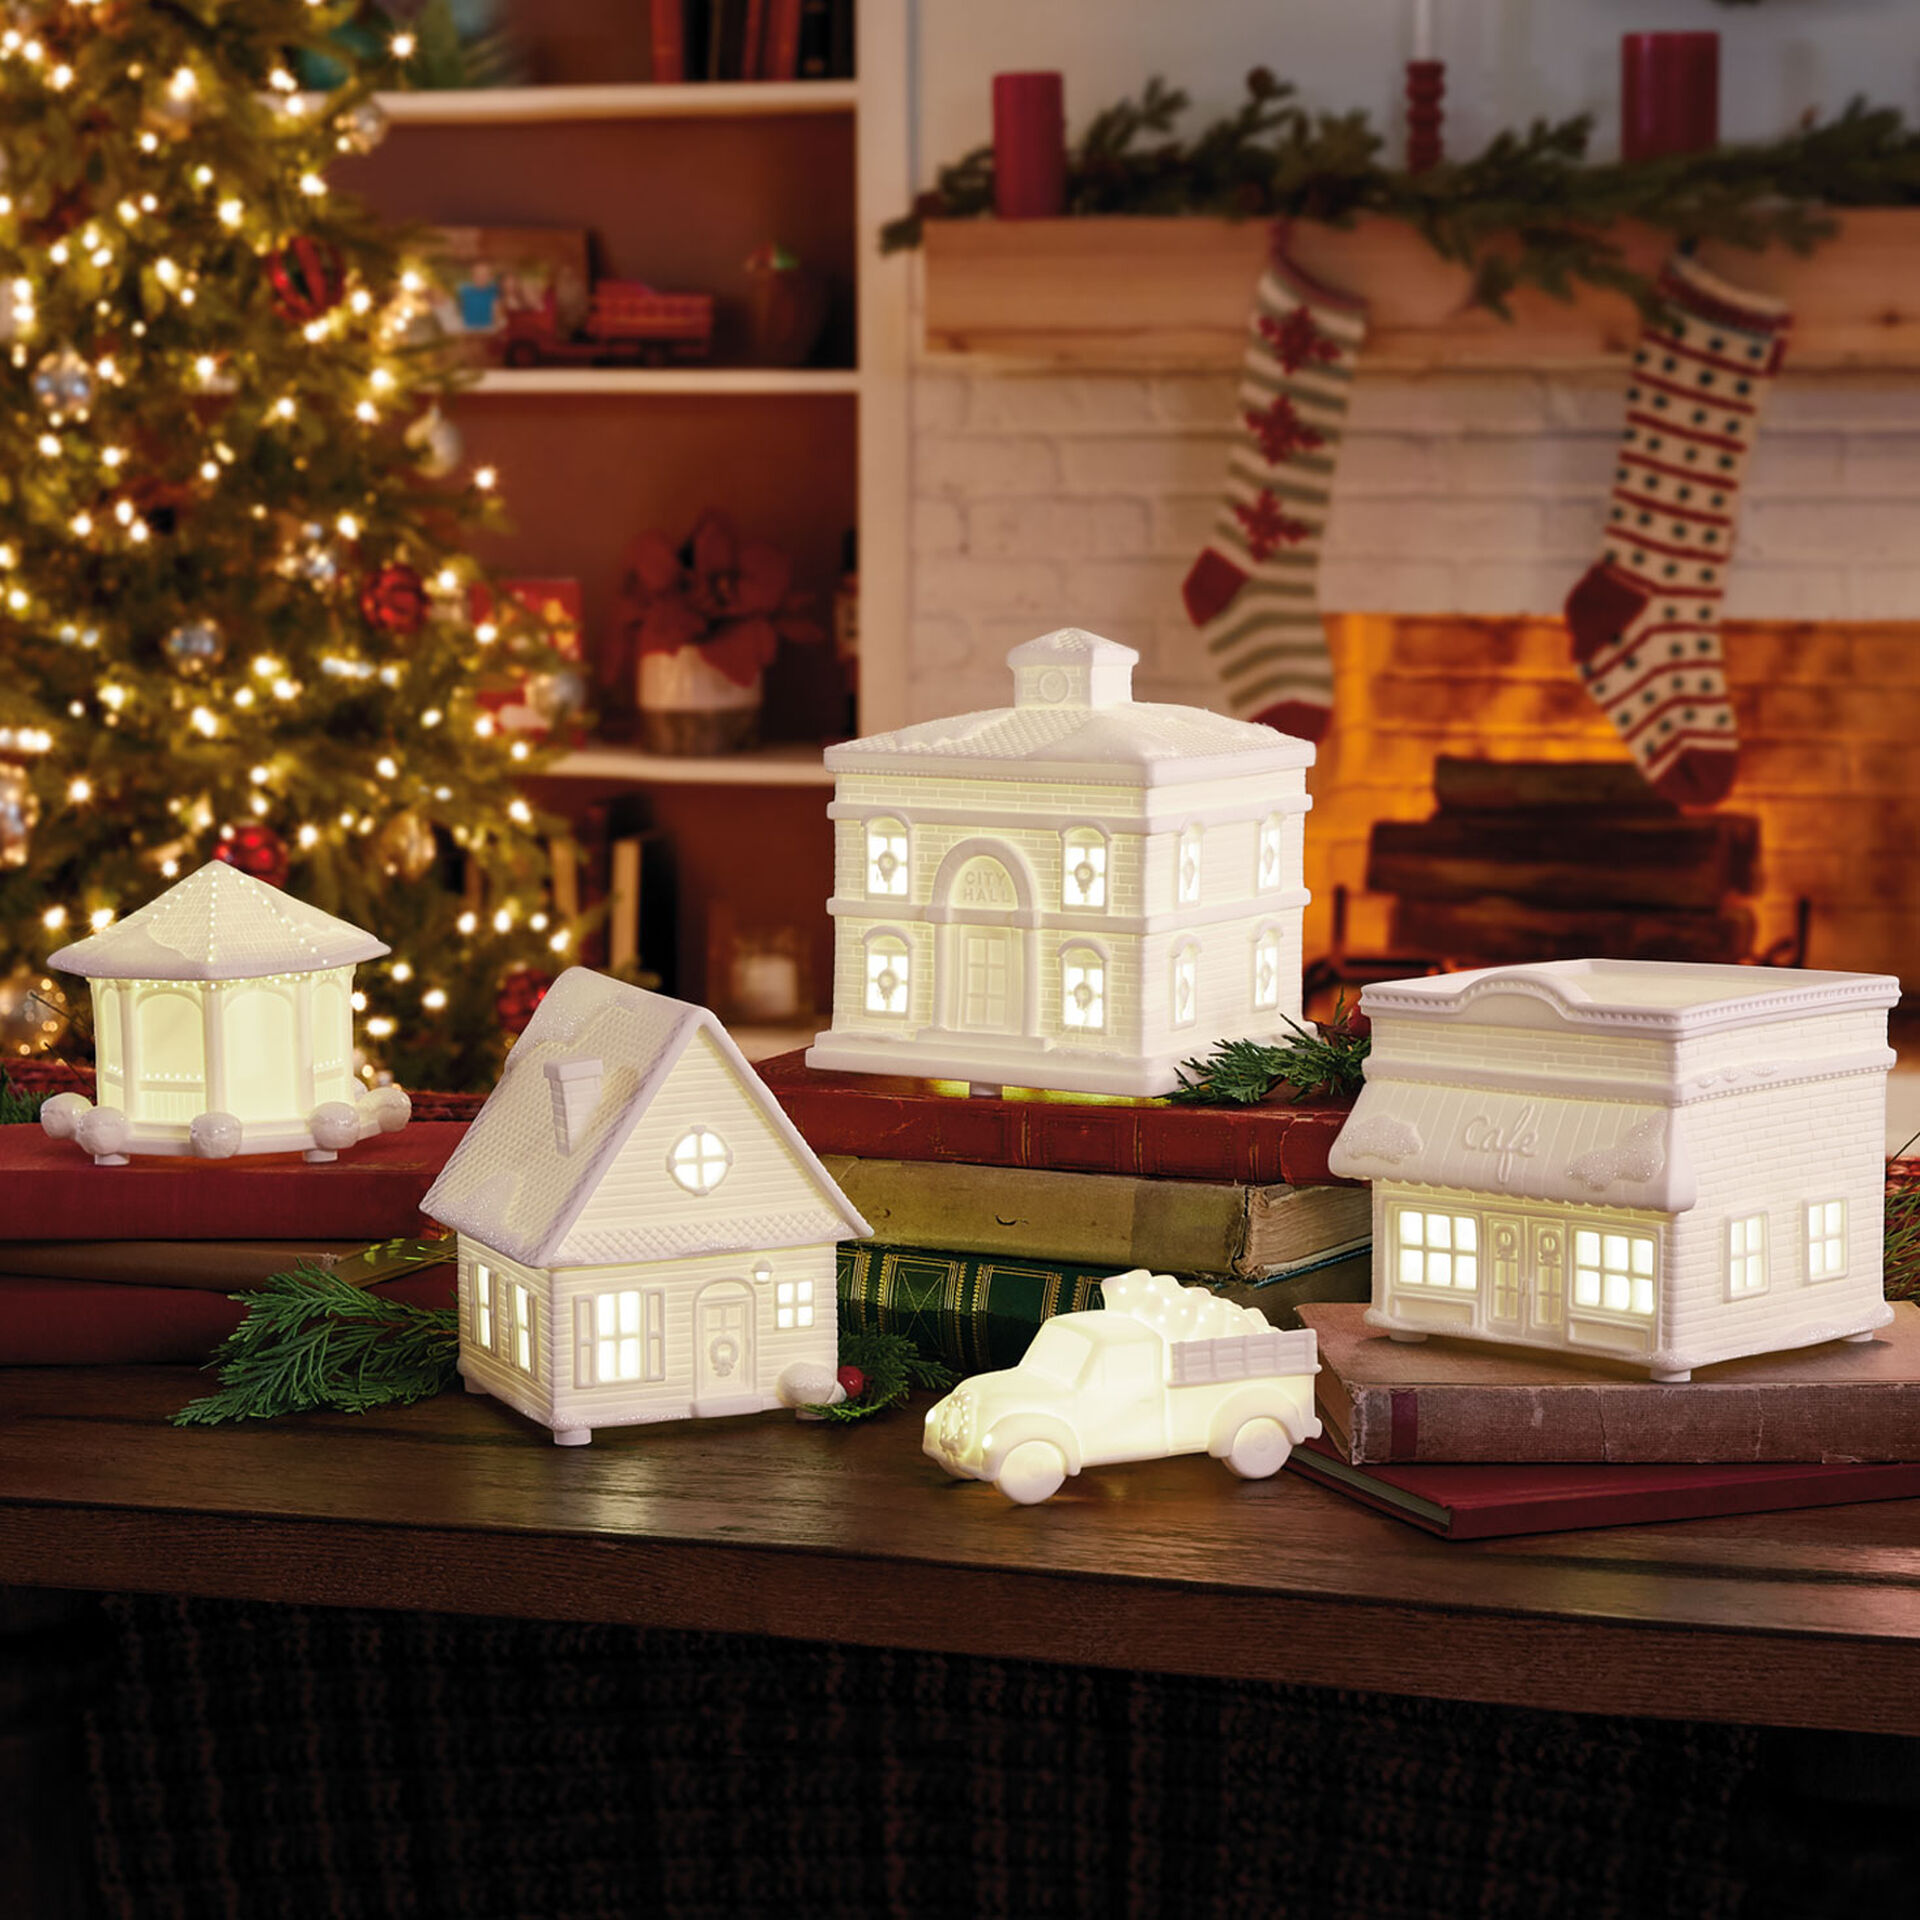 SAVE $50 on Hallmark Channel Musical Christmas Village With Light, Set of 5 $99.99